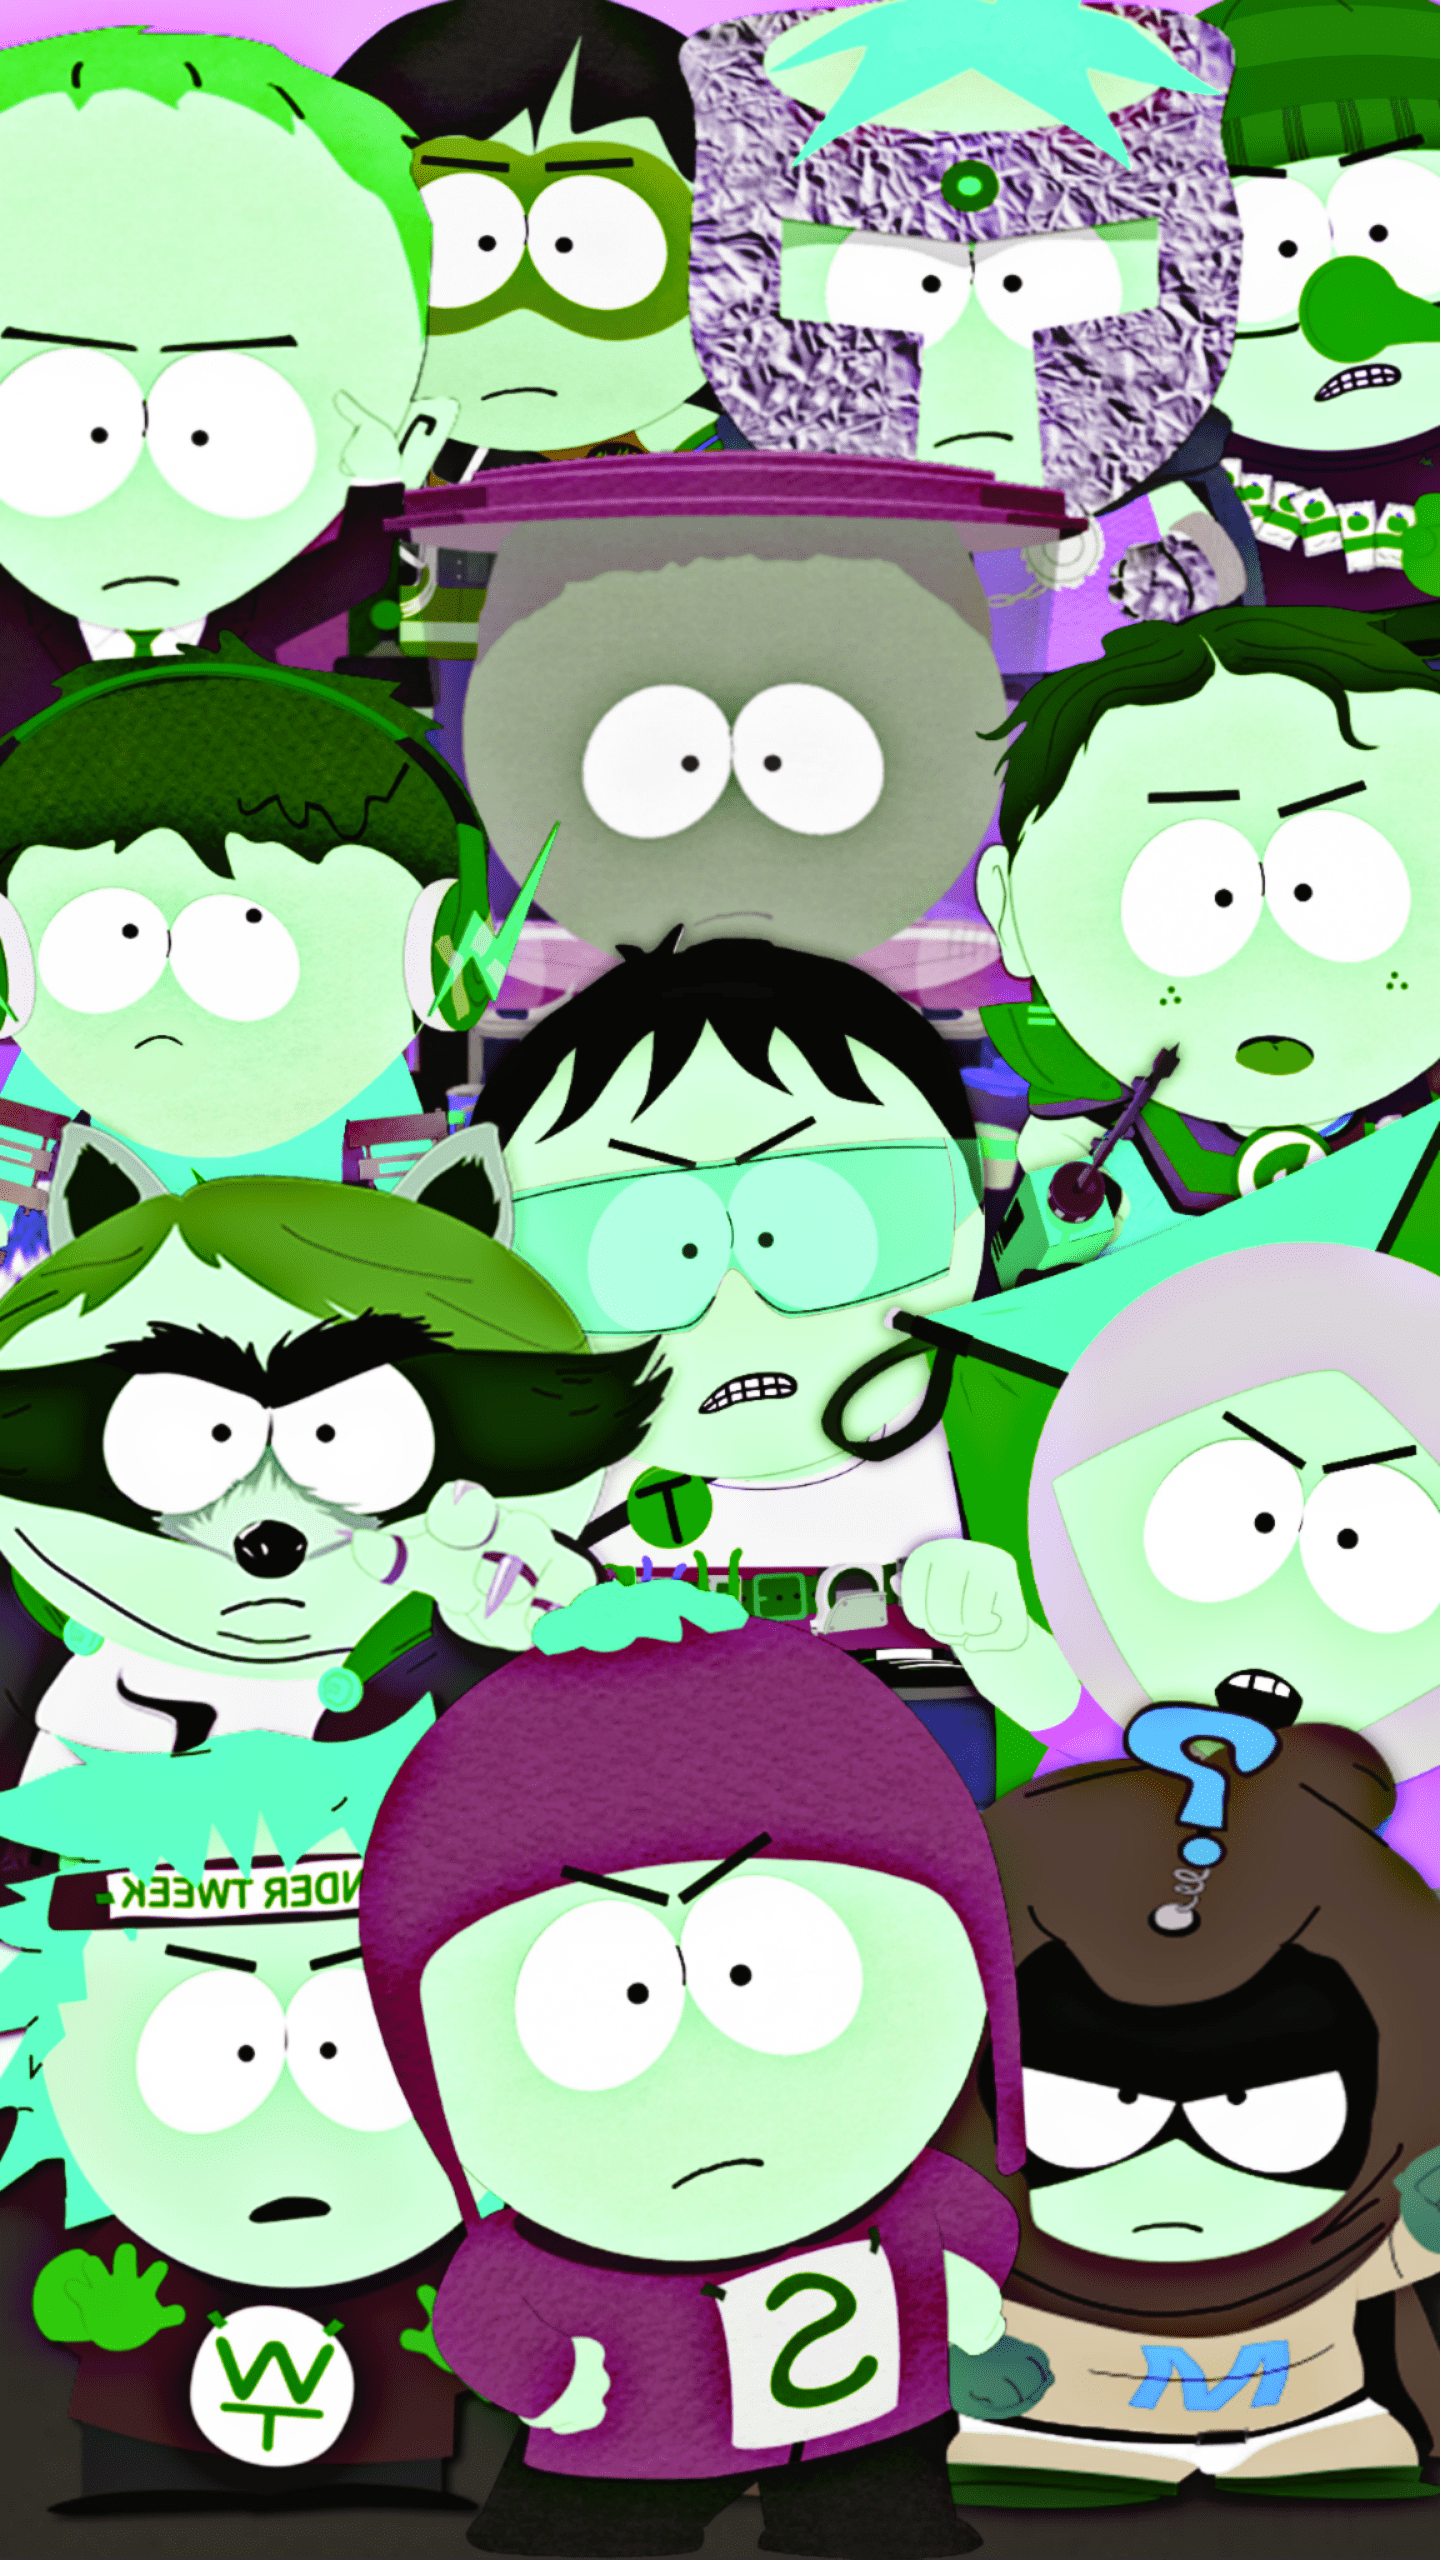 South Park Timmy Wallpaper 1